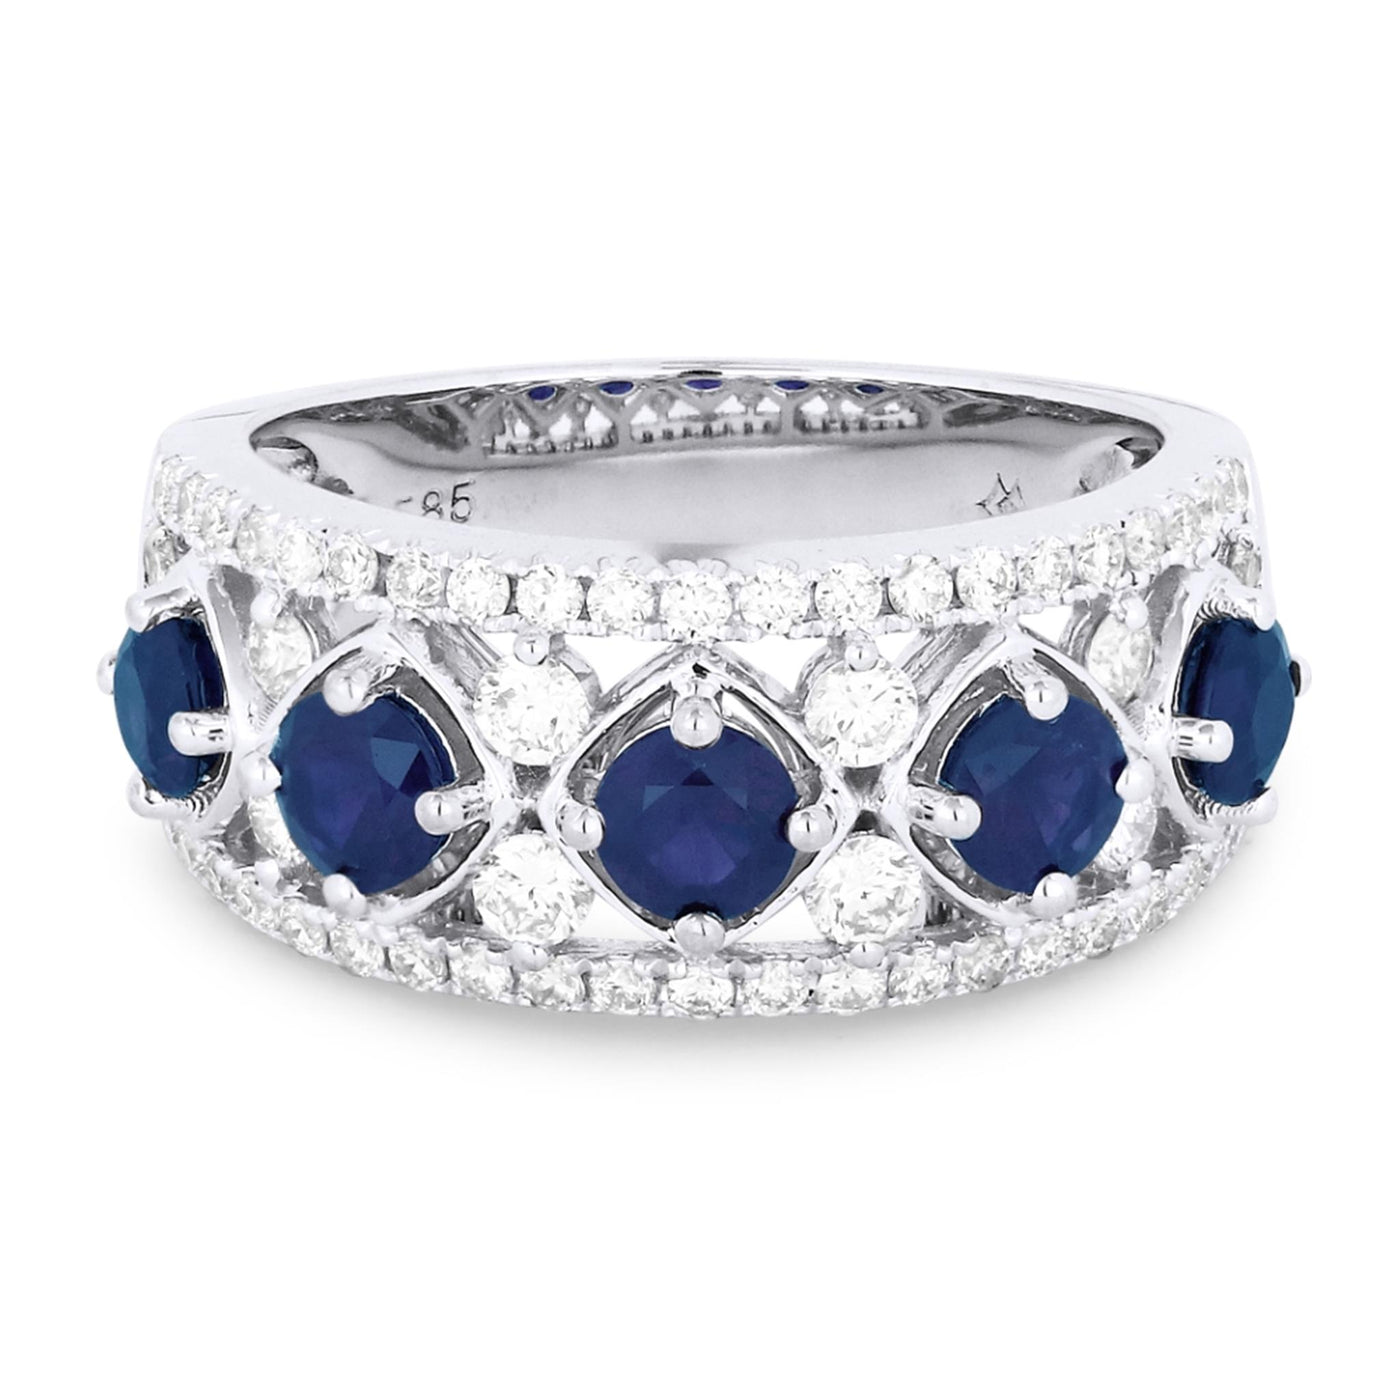 14K White Gold 1.79ctw Band Style Ring with Diamonds and Sapphires